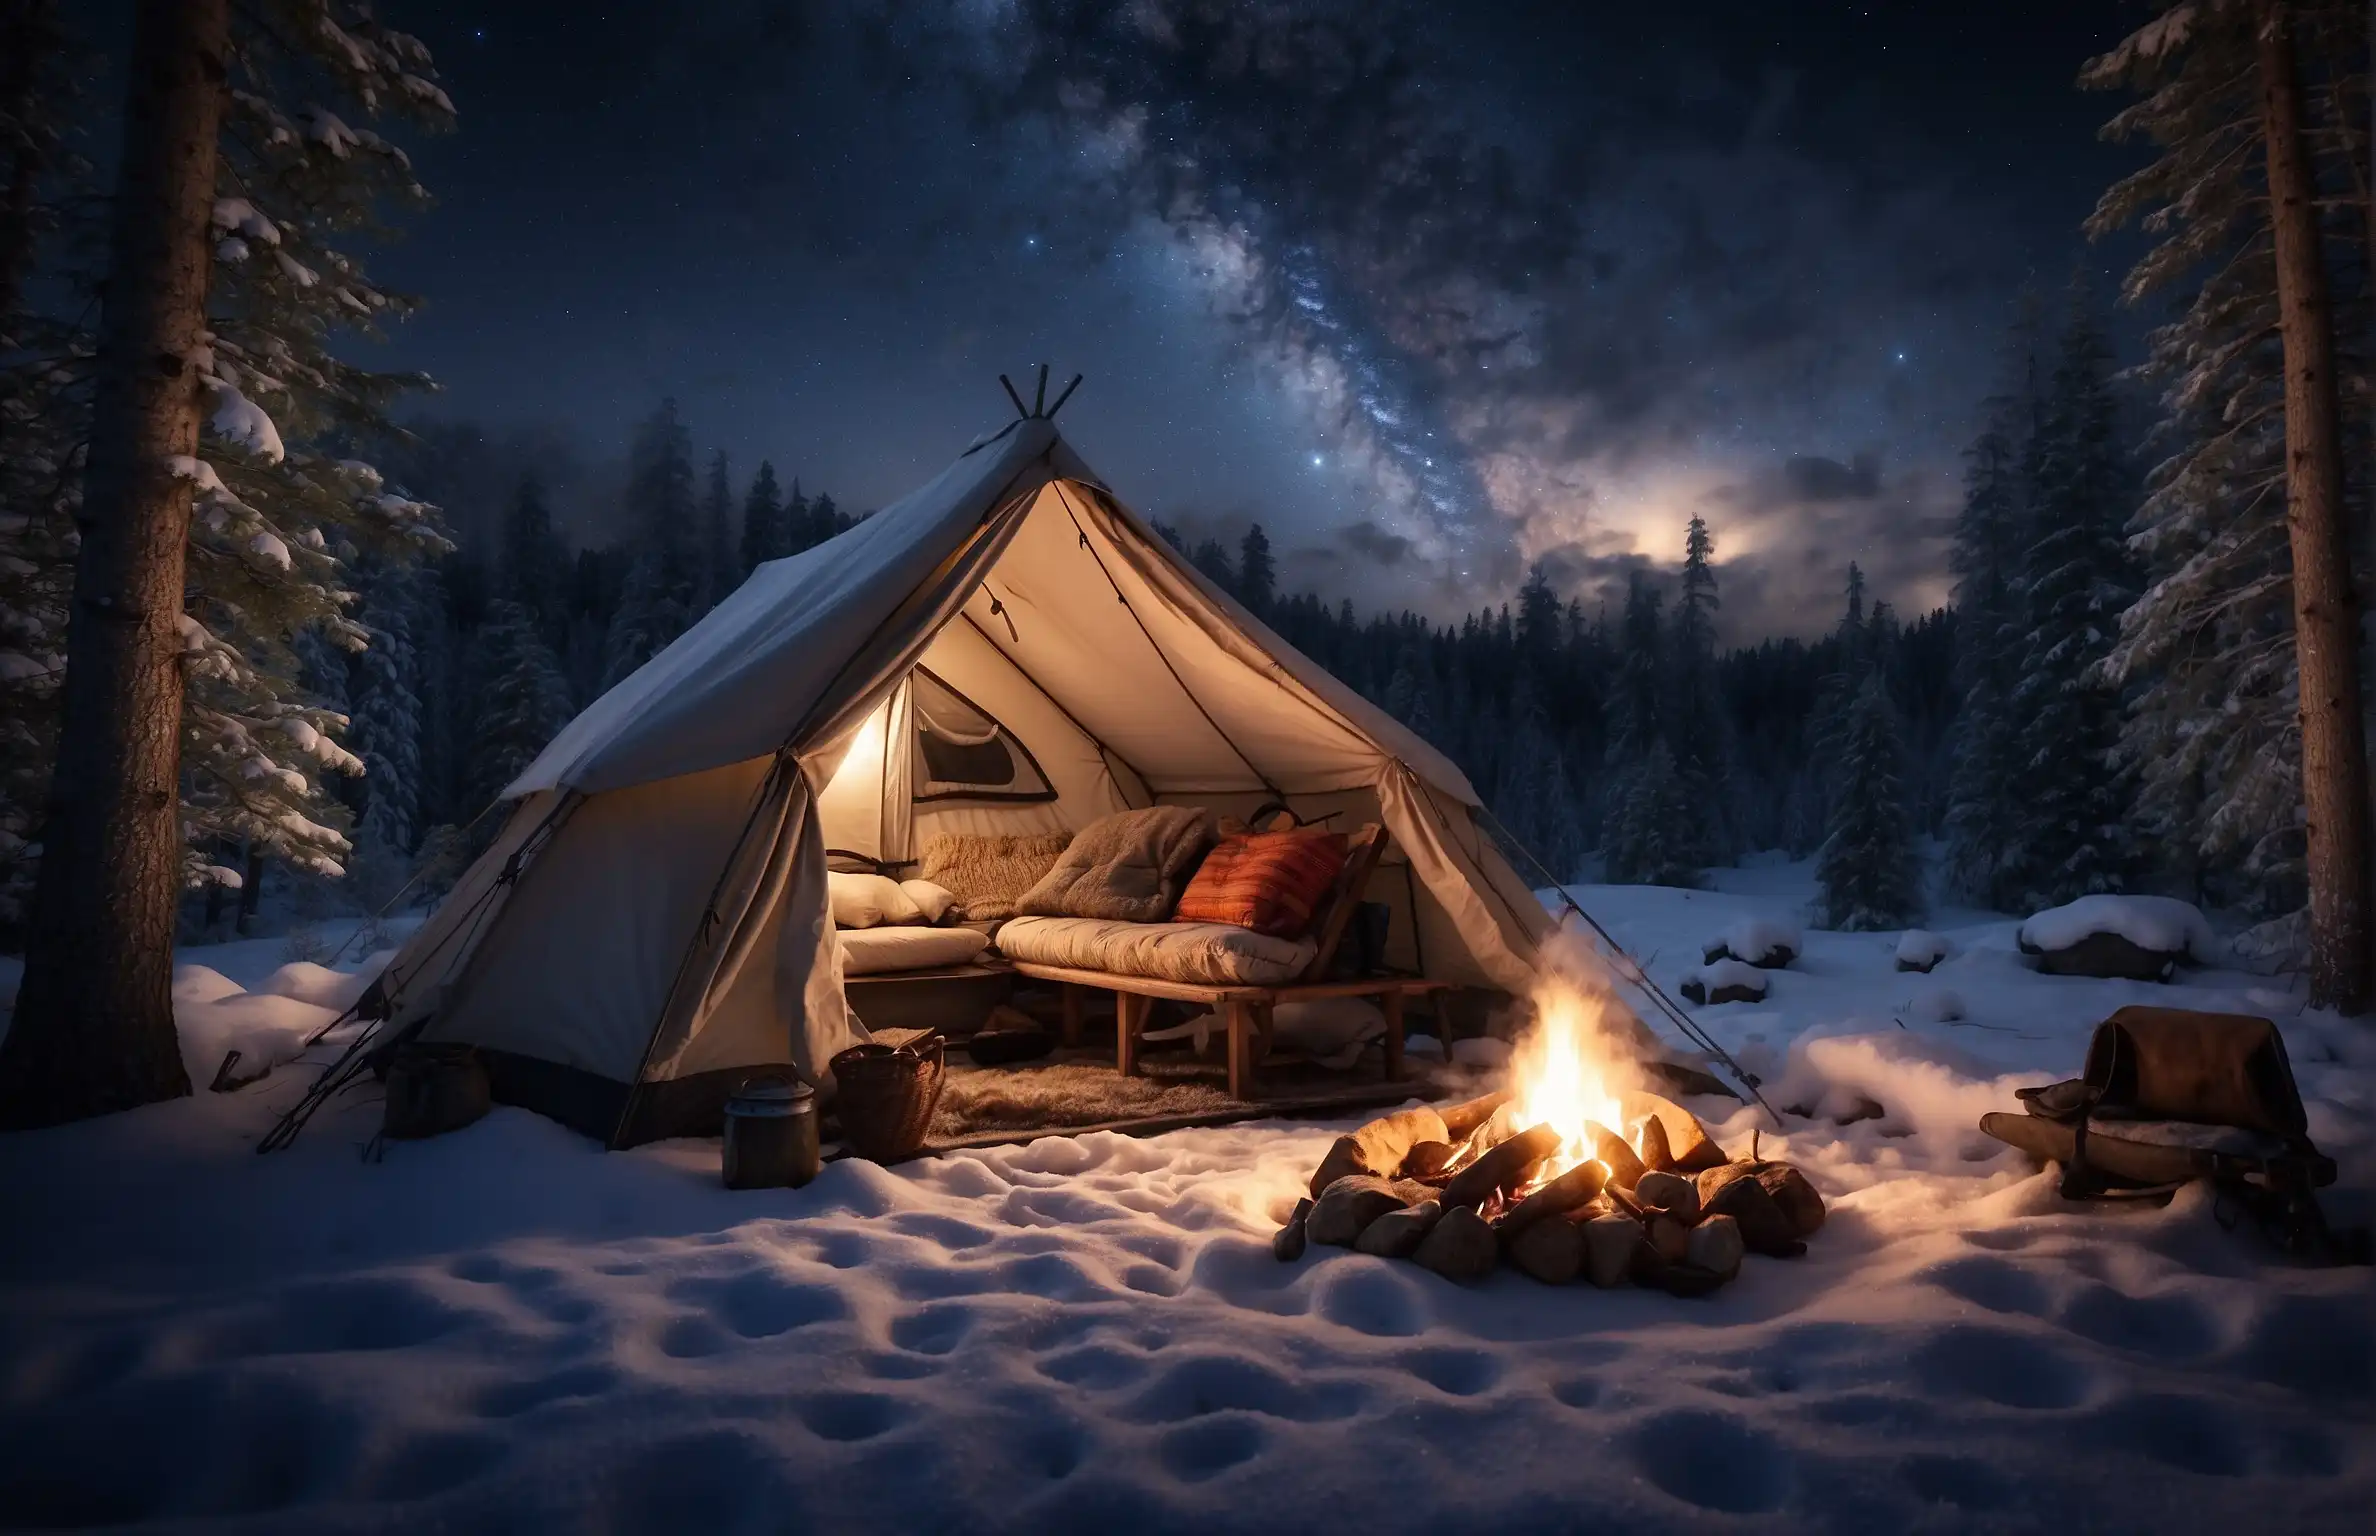 Stay Warm Camping in a Tent